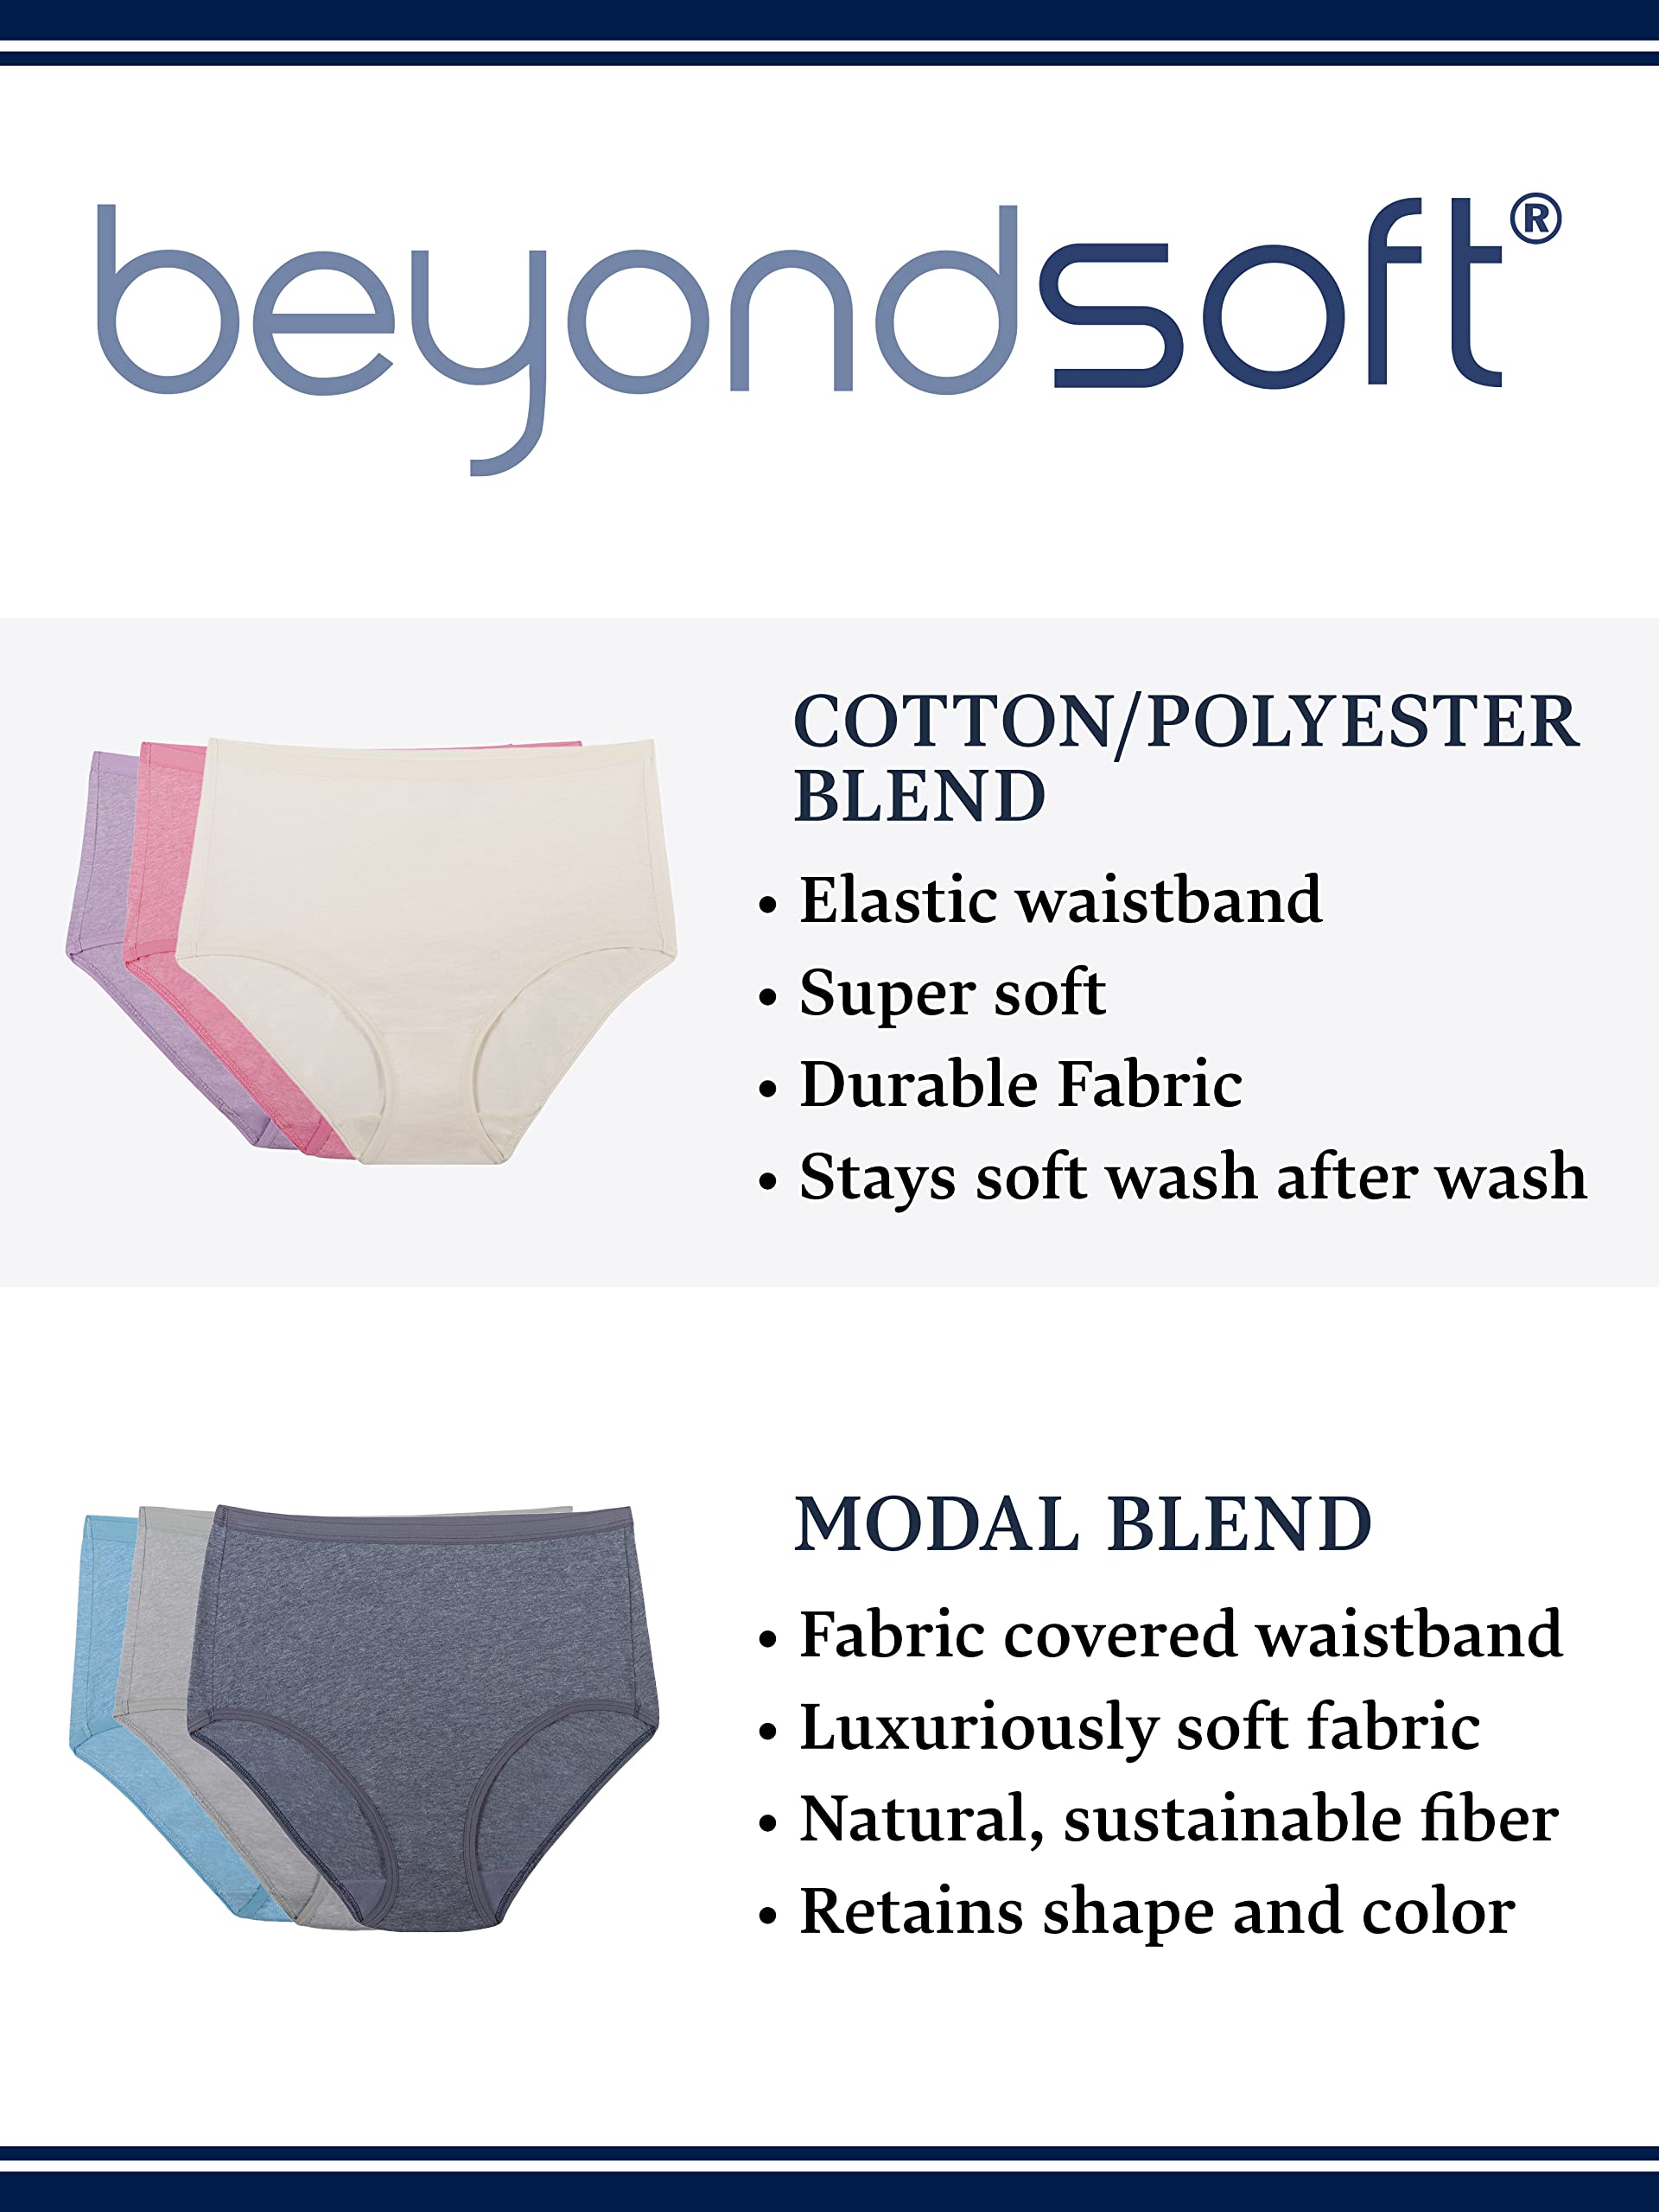 Fruit of the Loom Women's Beyondsoft Underwear, Super Soft Designed with Comfort in Mind, Available in Plus Size